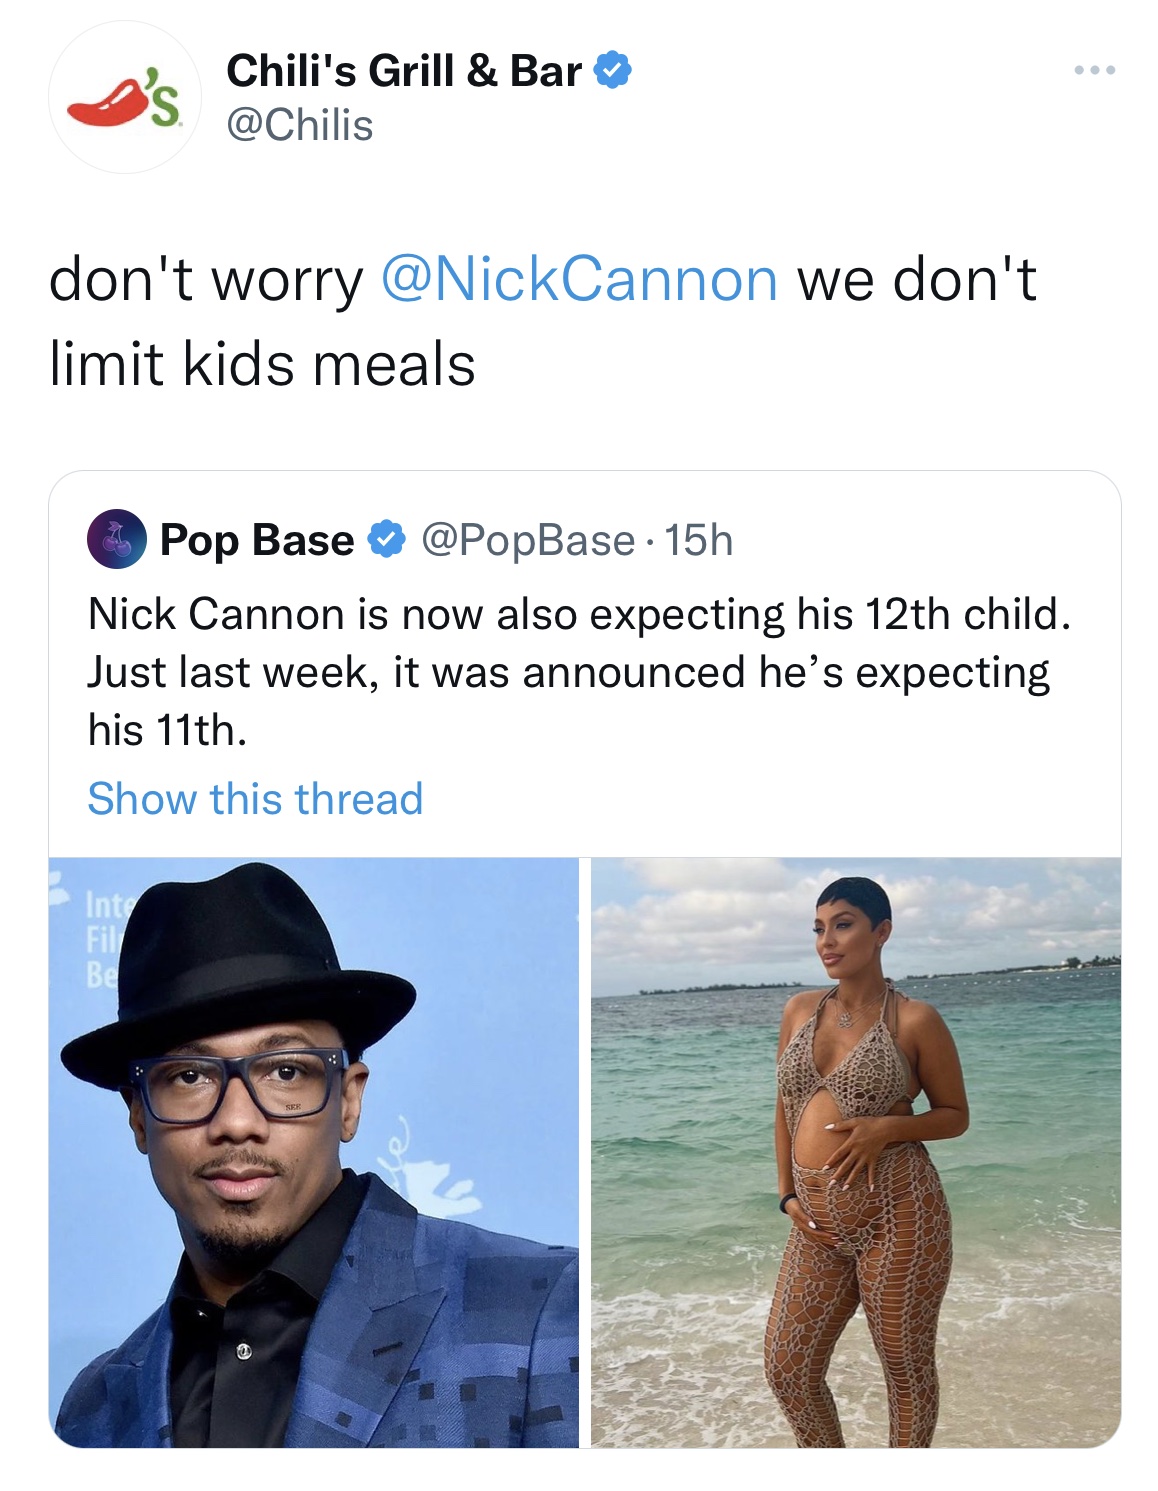 Tweets roasting celebs - water - Chili's Grill & Bar don't worry we don't limit kids meals Pop Base 15h Nick Cannon is now also expecting his 12th child. Just last week, it was announced he's expecting his 11th. Show this thread Inte Fil Be O